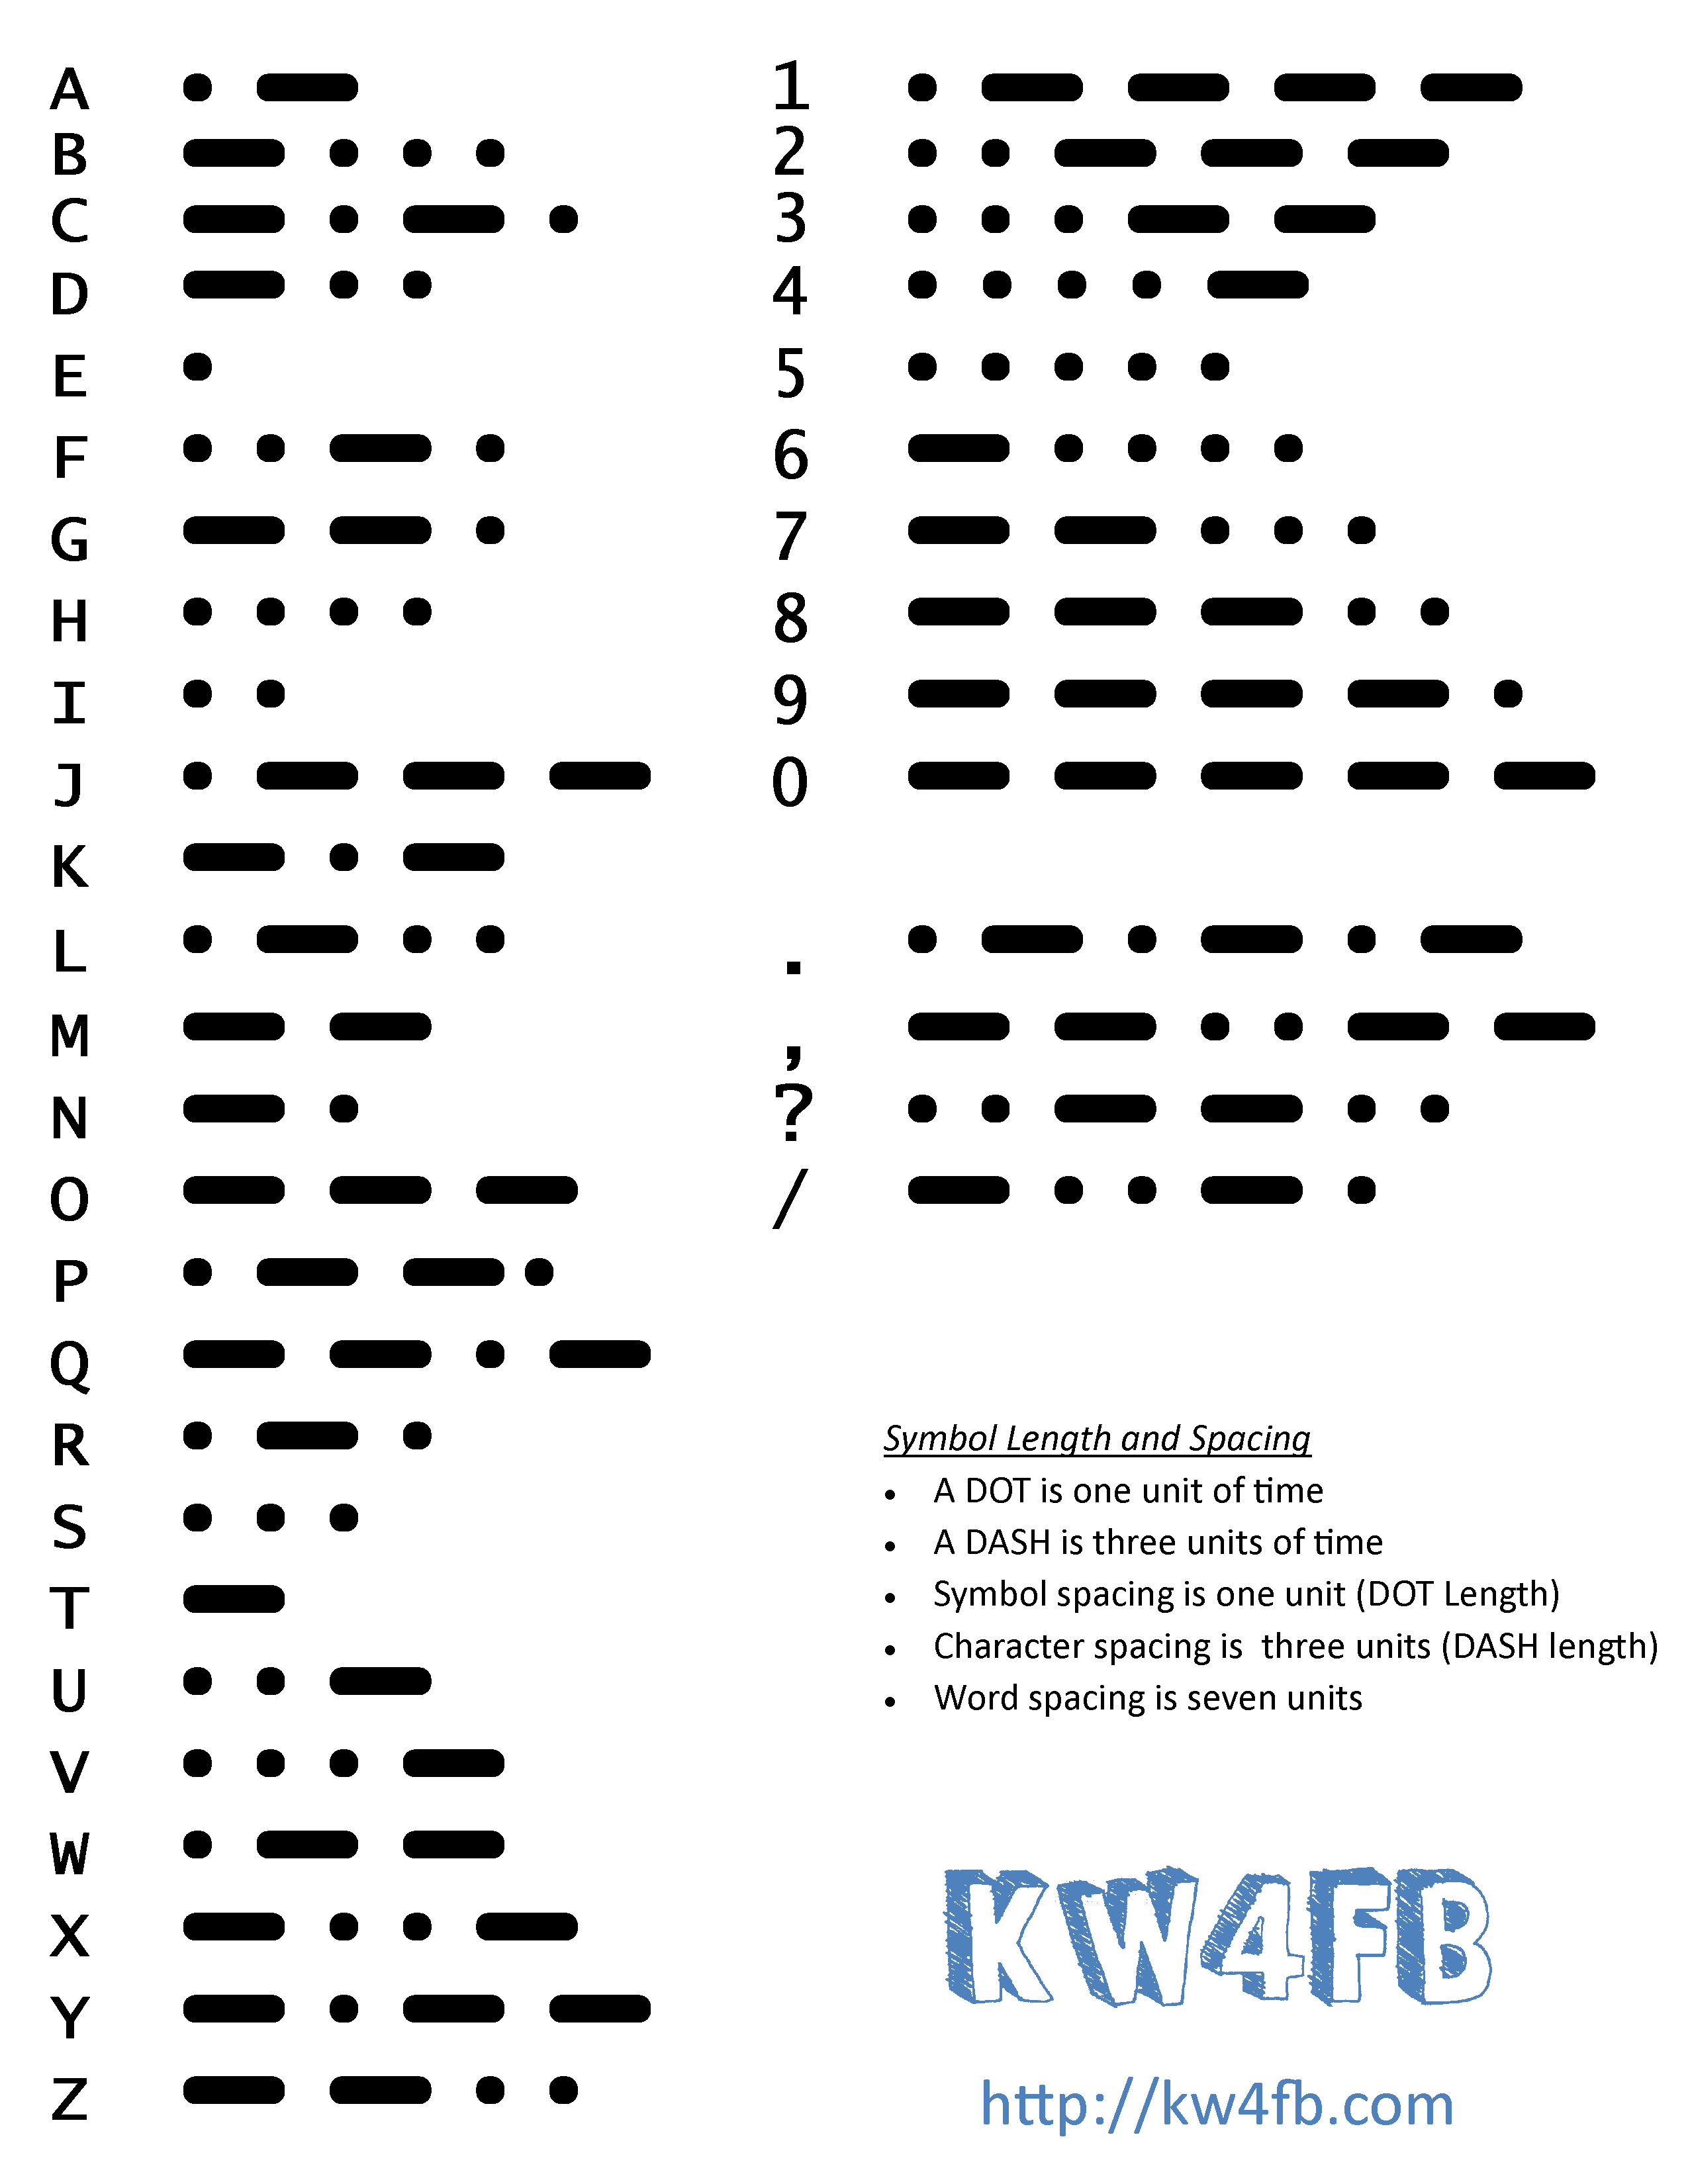 Morse Code Quick Reference by KW4FB KW4FB